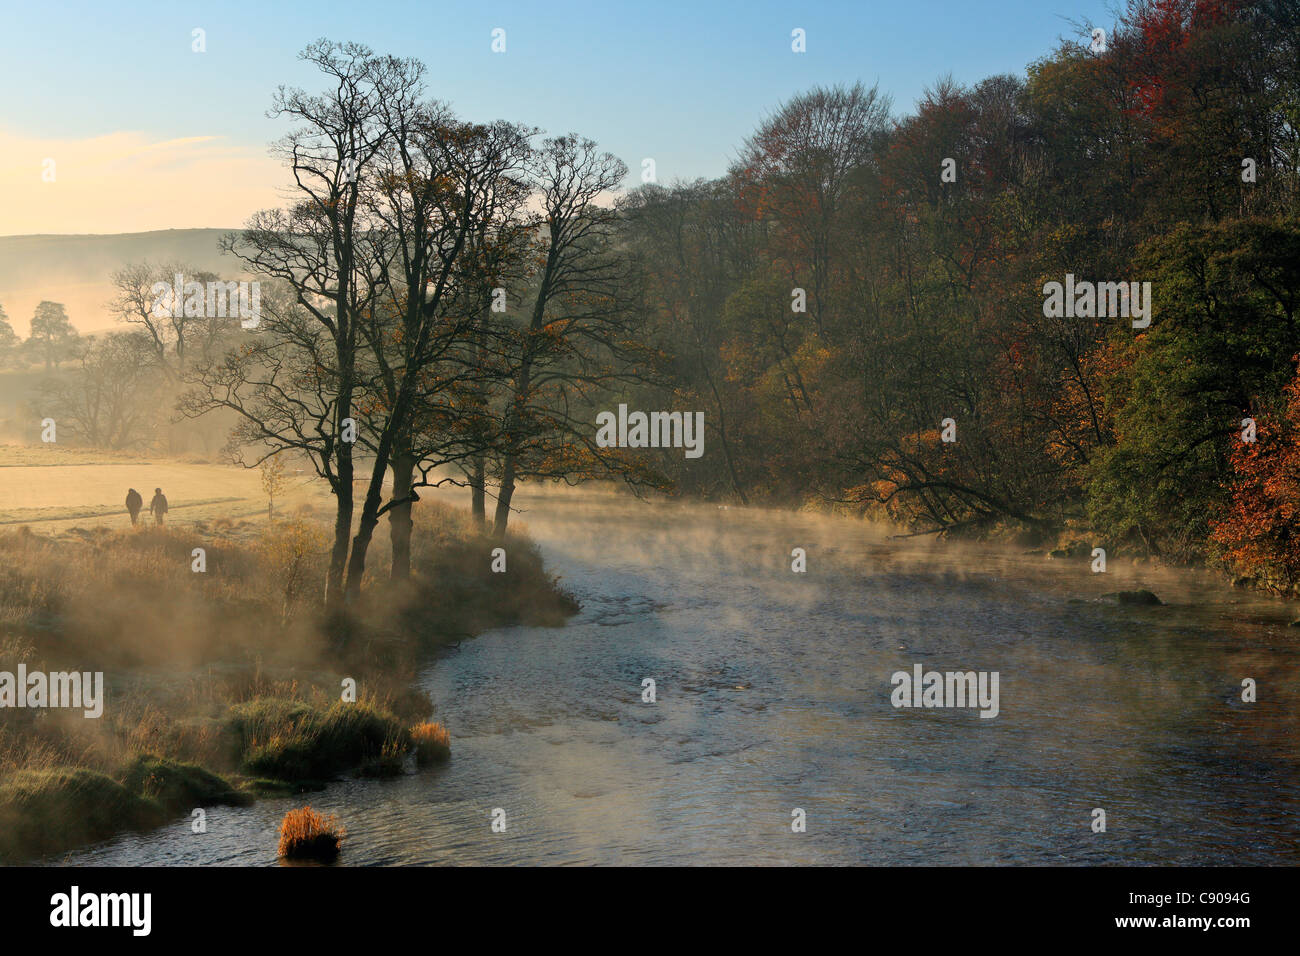 A couple walks along the shore of a misty River Wharfe in autumn Stock Photo